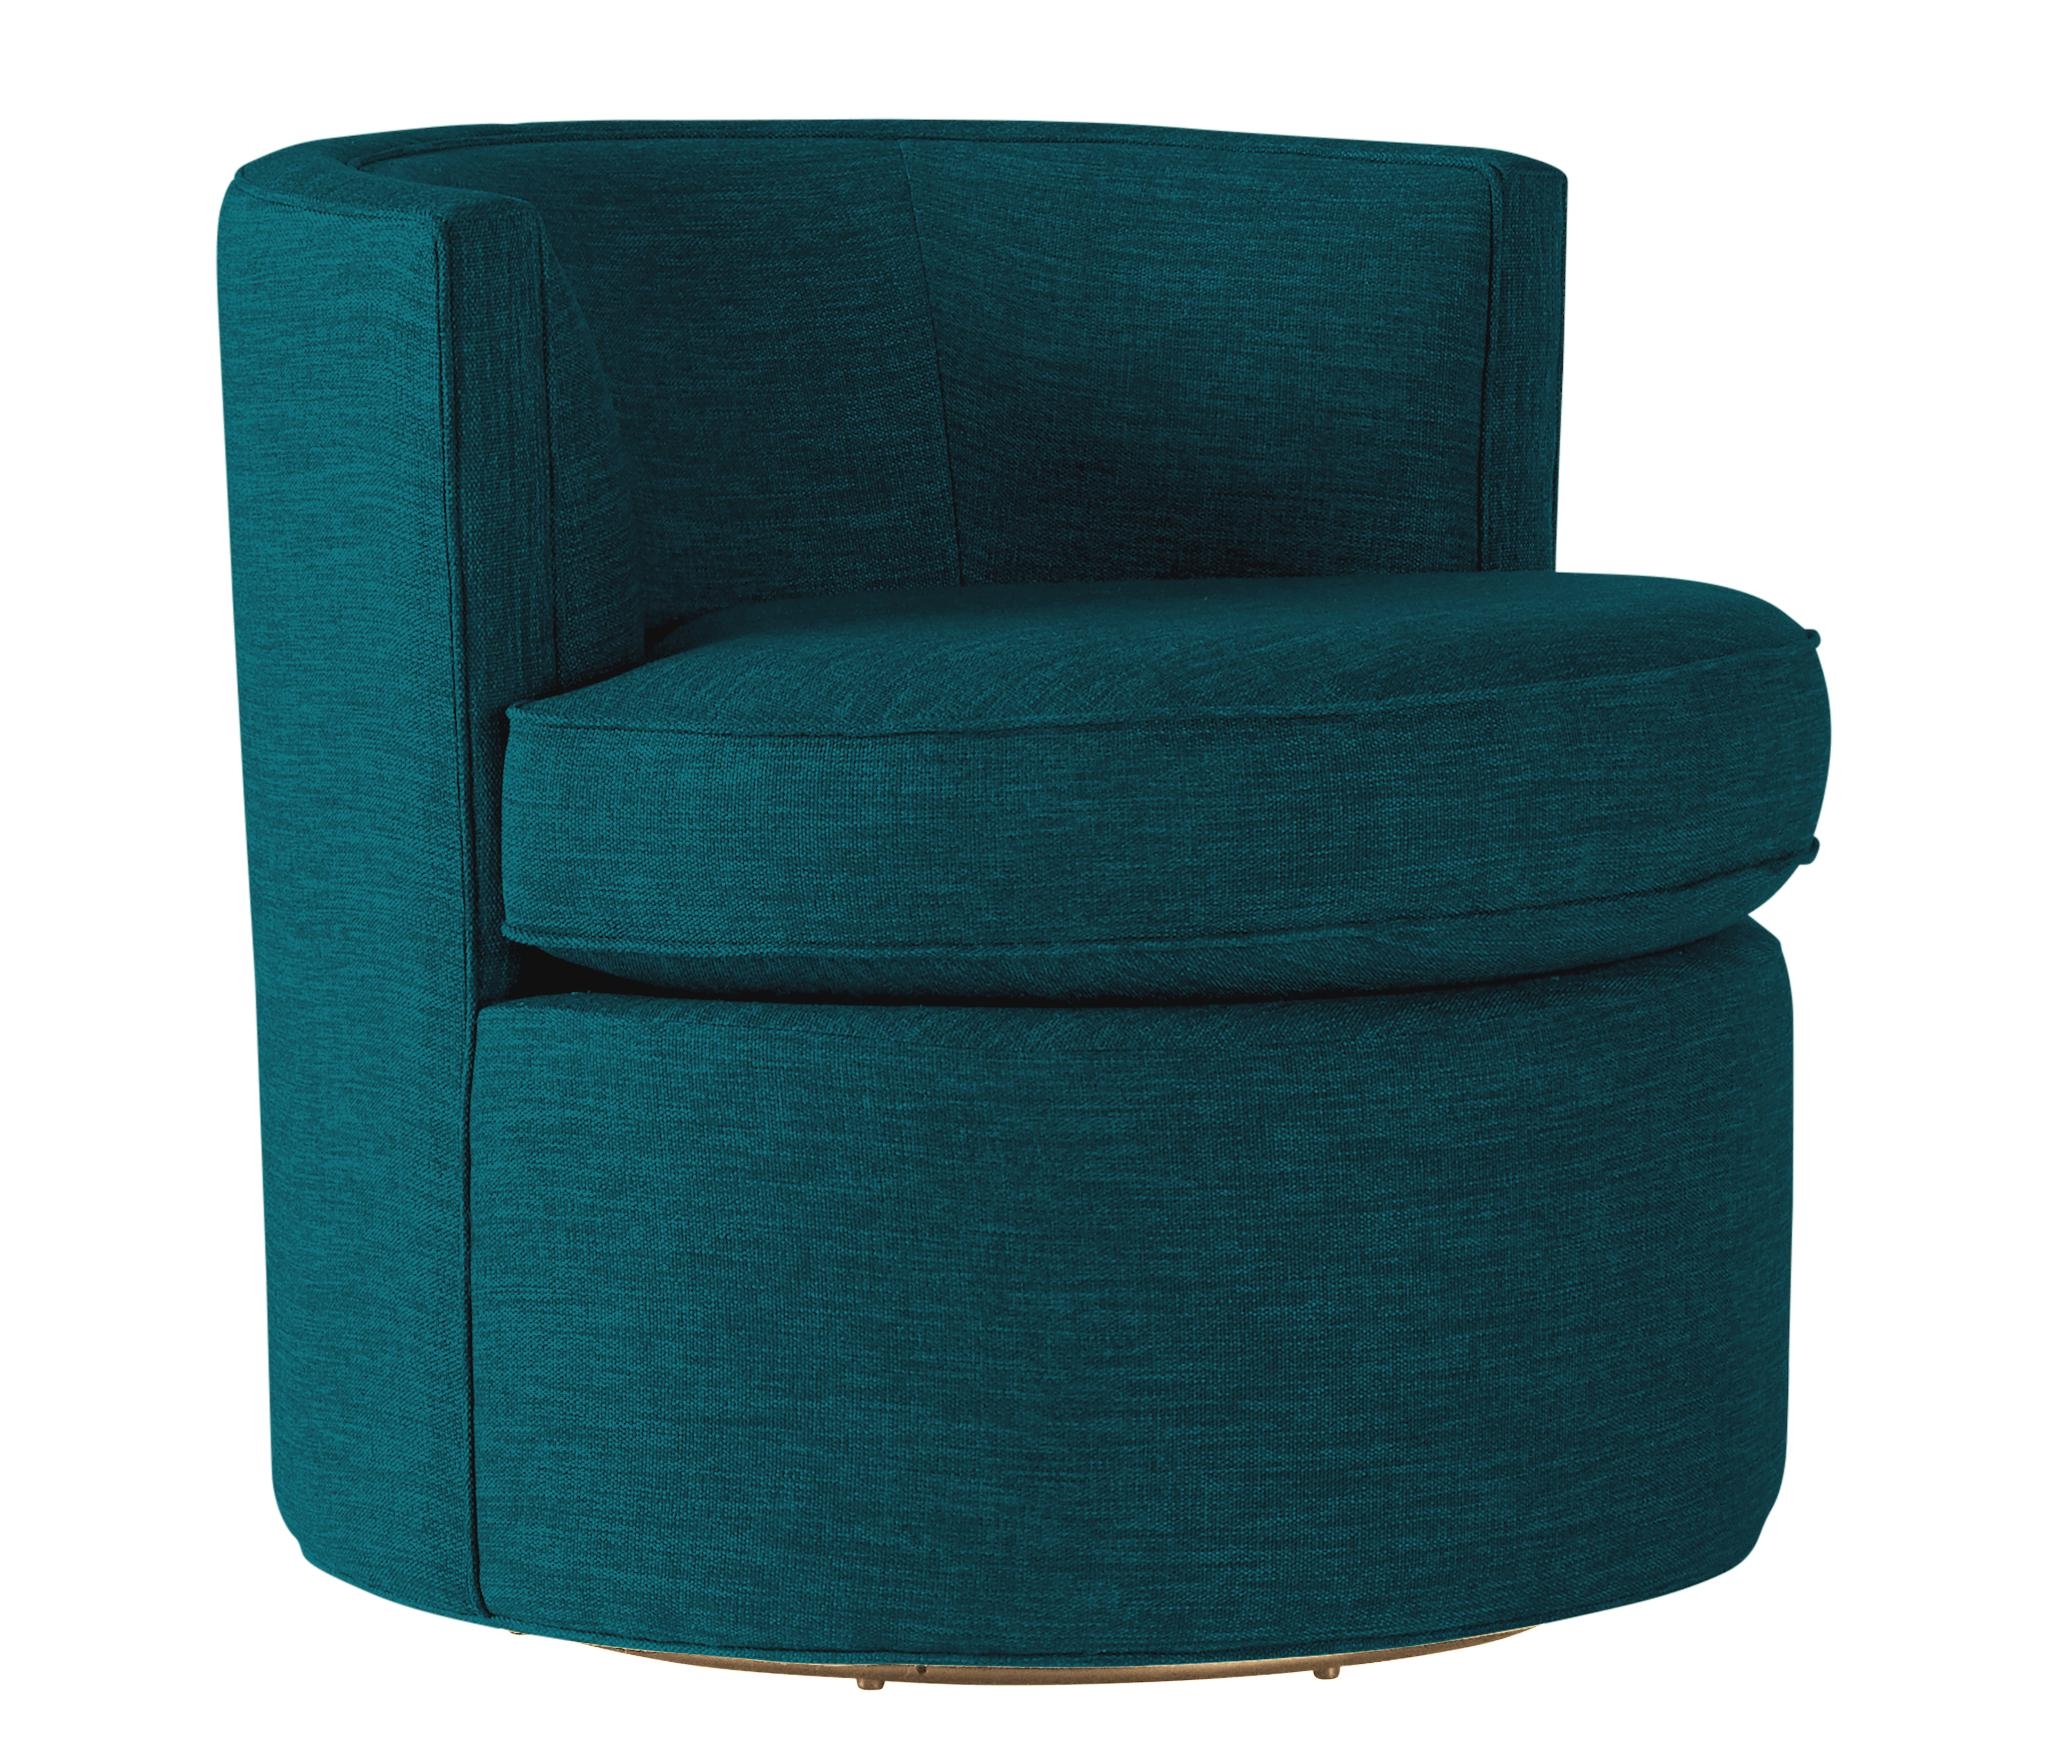 Blue Carly Mid Century Modern Swivel Chair - Lucky Turquoise - Image 1